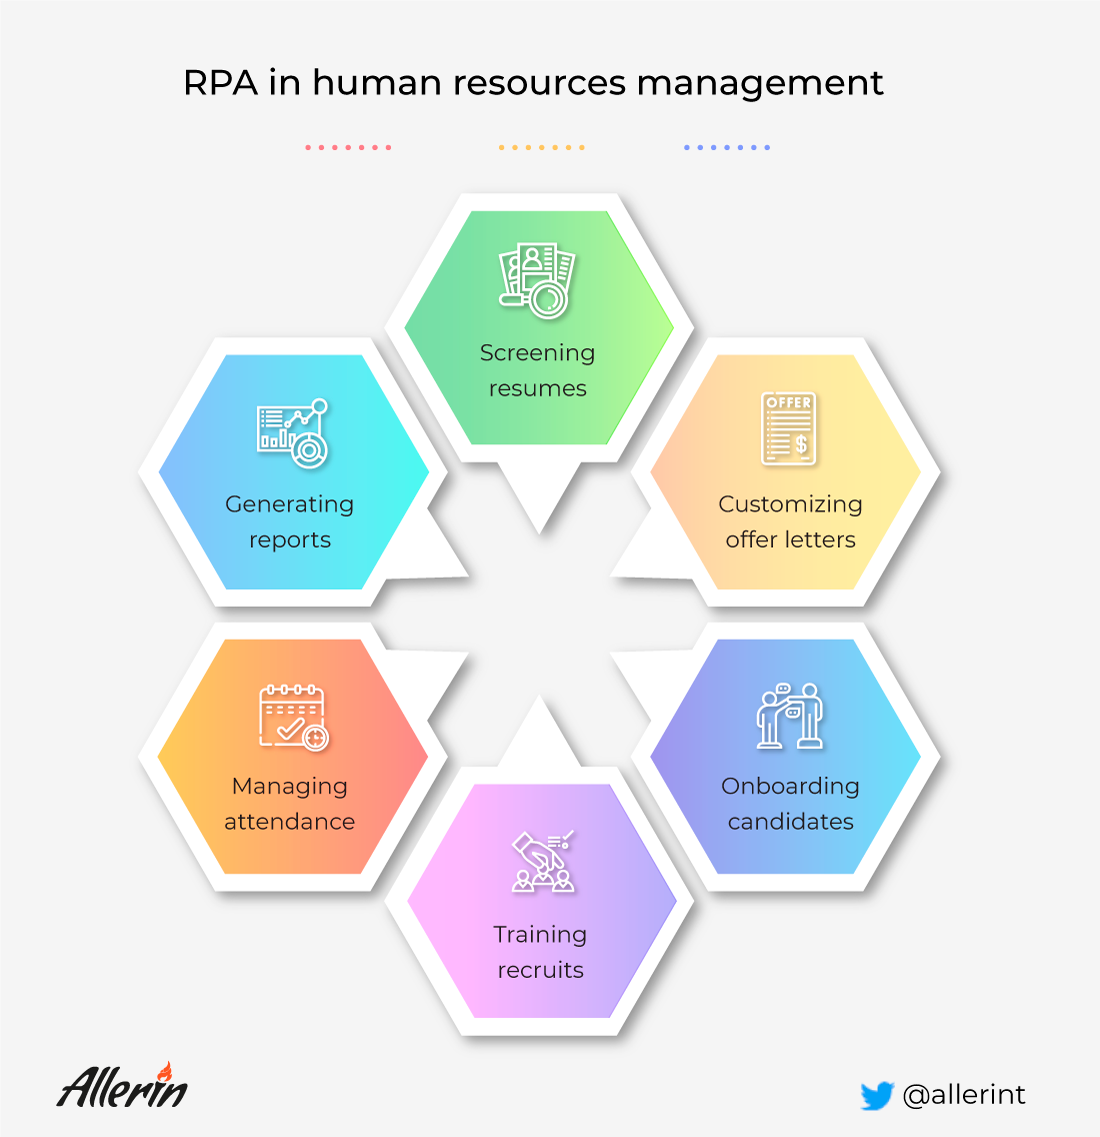 RPA in human resources management